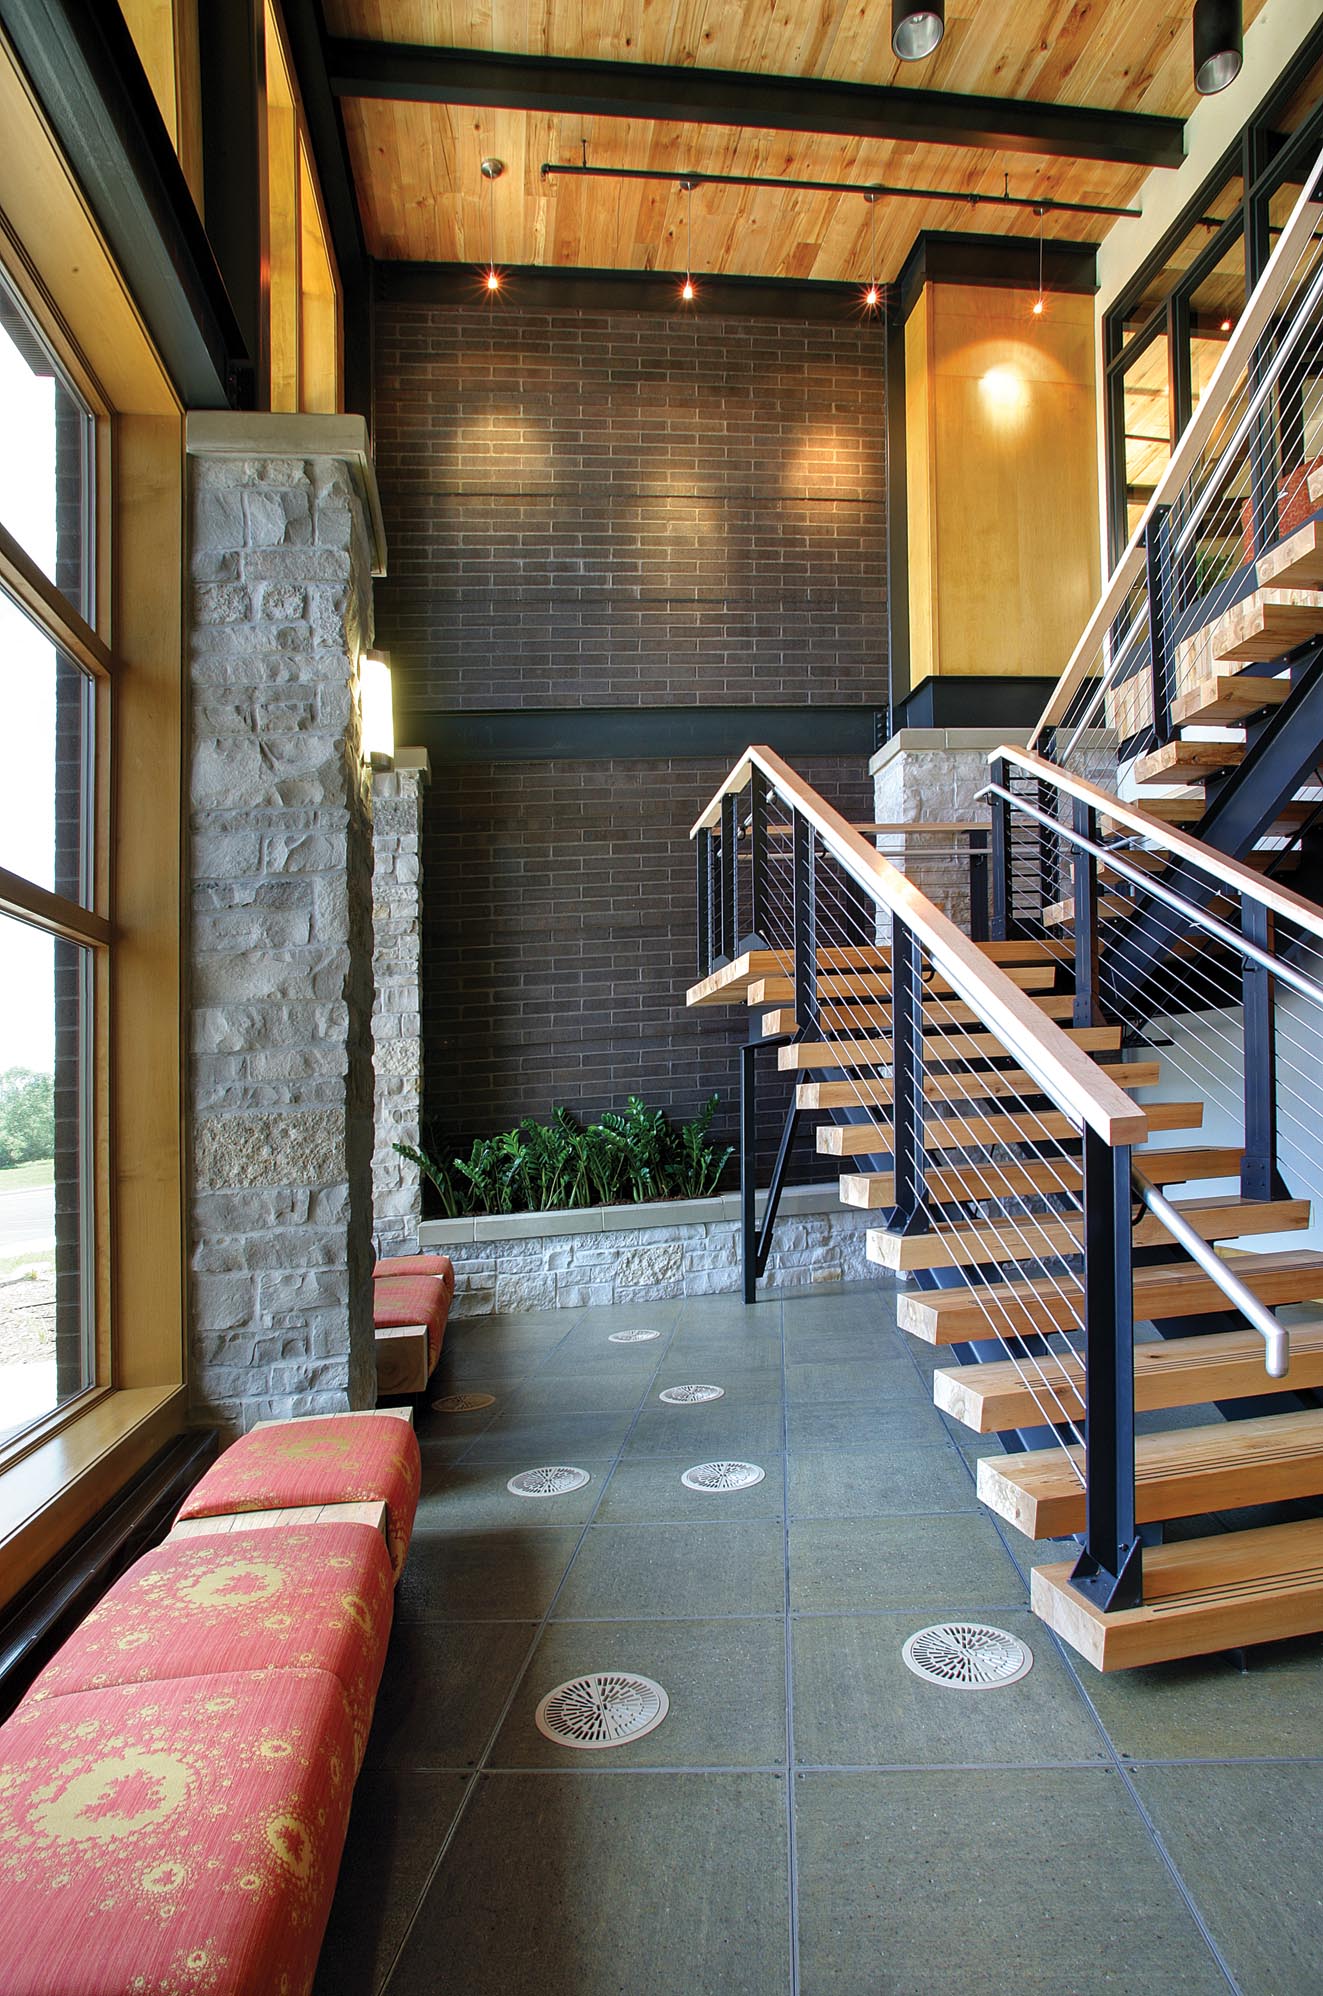 Reclaimed Ceiling Material and Stair Treads in US Venture Reception Area